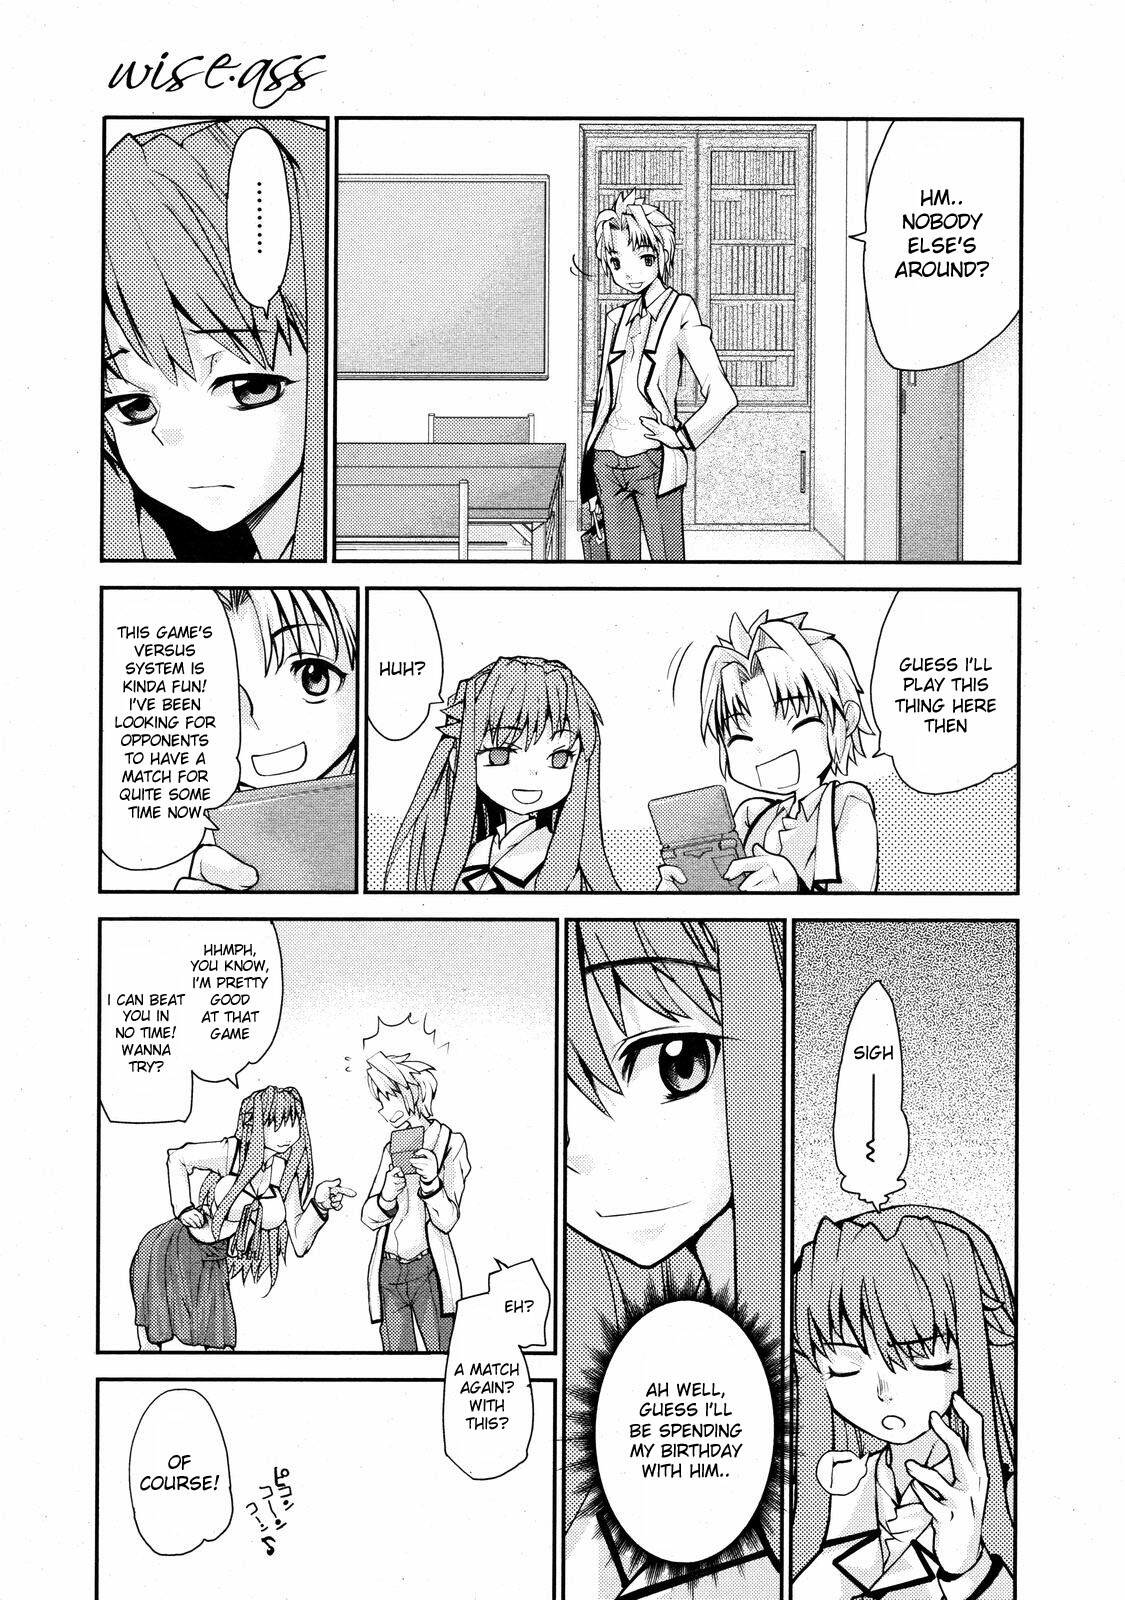 [Tomoe Tenbu] Wise Ass - Ch.1-6 (English)(DeCensored) page 47 full